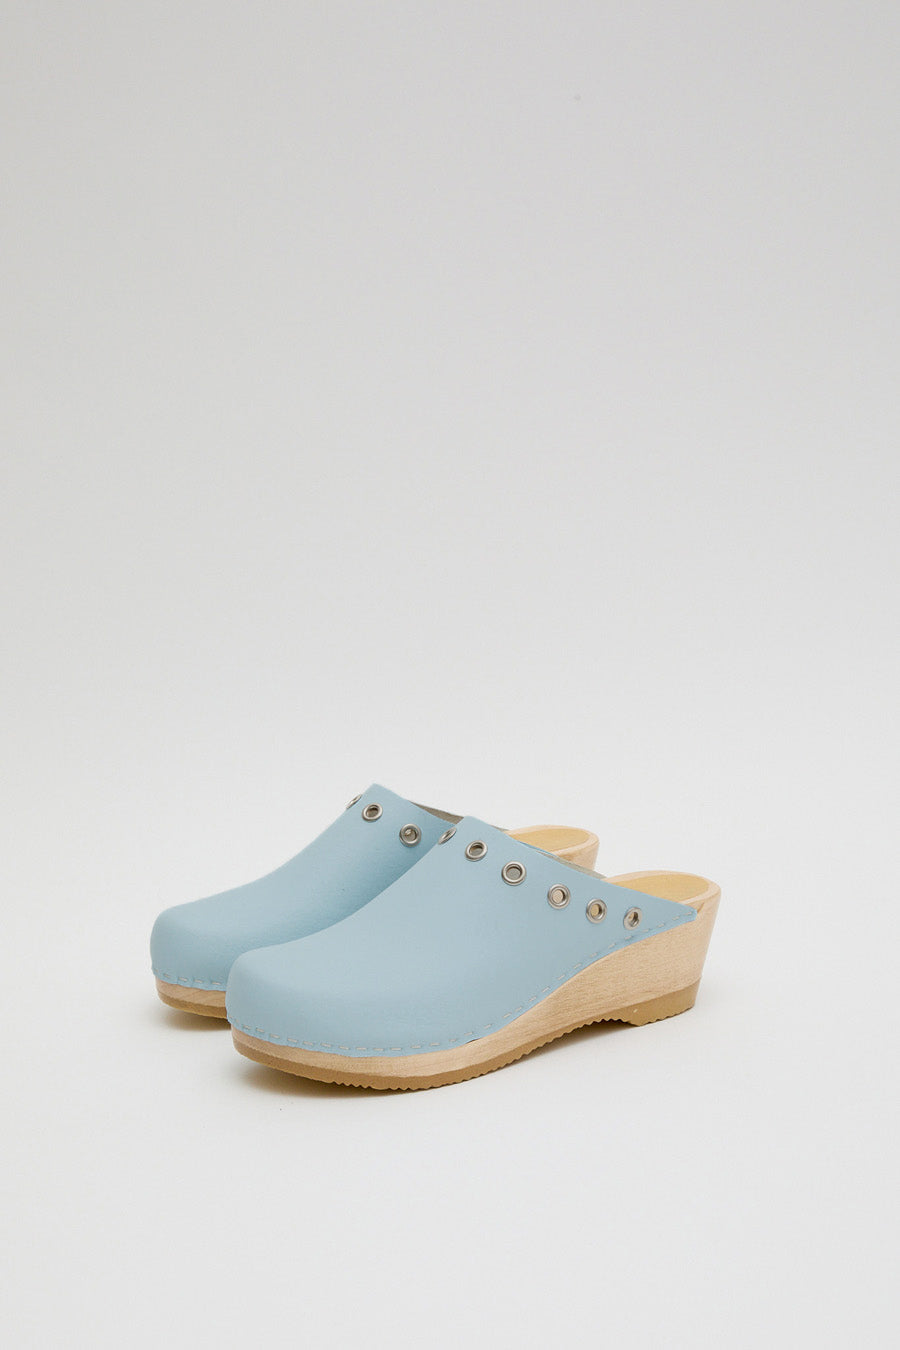 No.6 Bella Clog on Mid Wedge in Light Blue with Eyelets